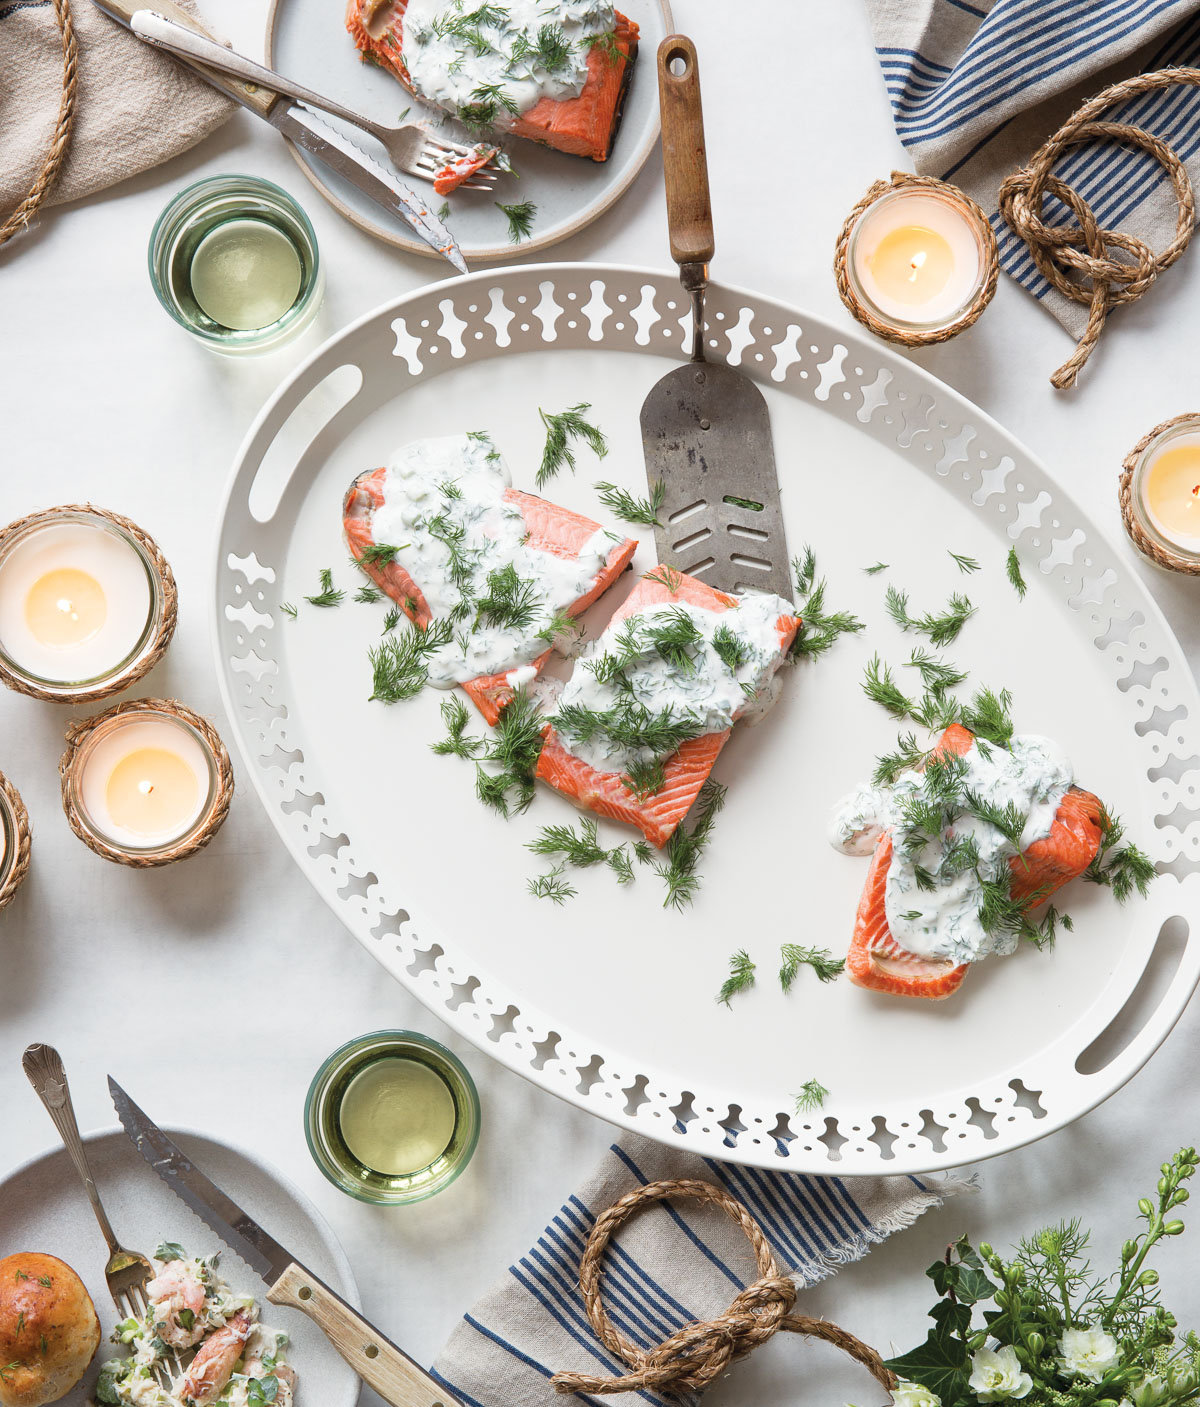 Celebrate Midsummer by making this easy and delicious poached salmon with dill sauce.